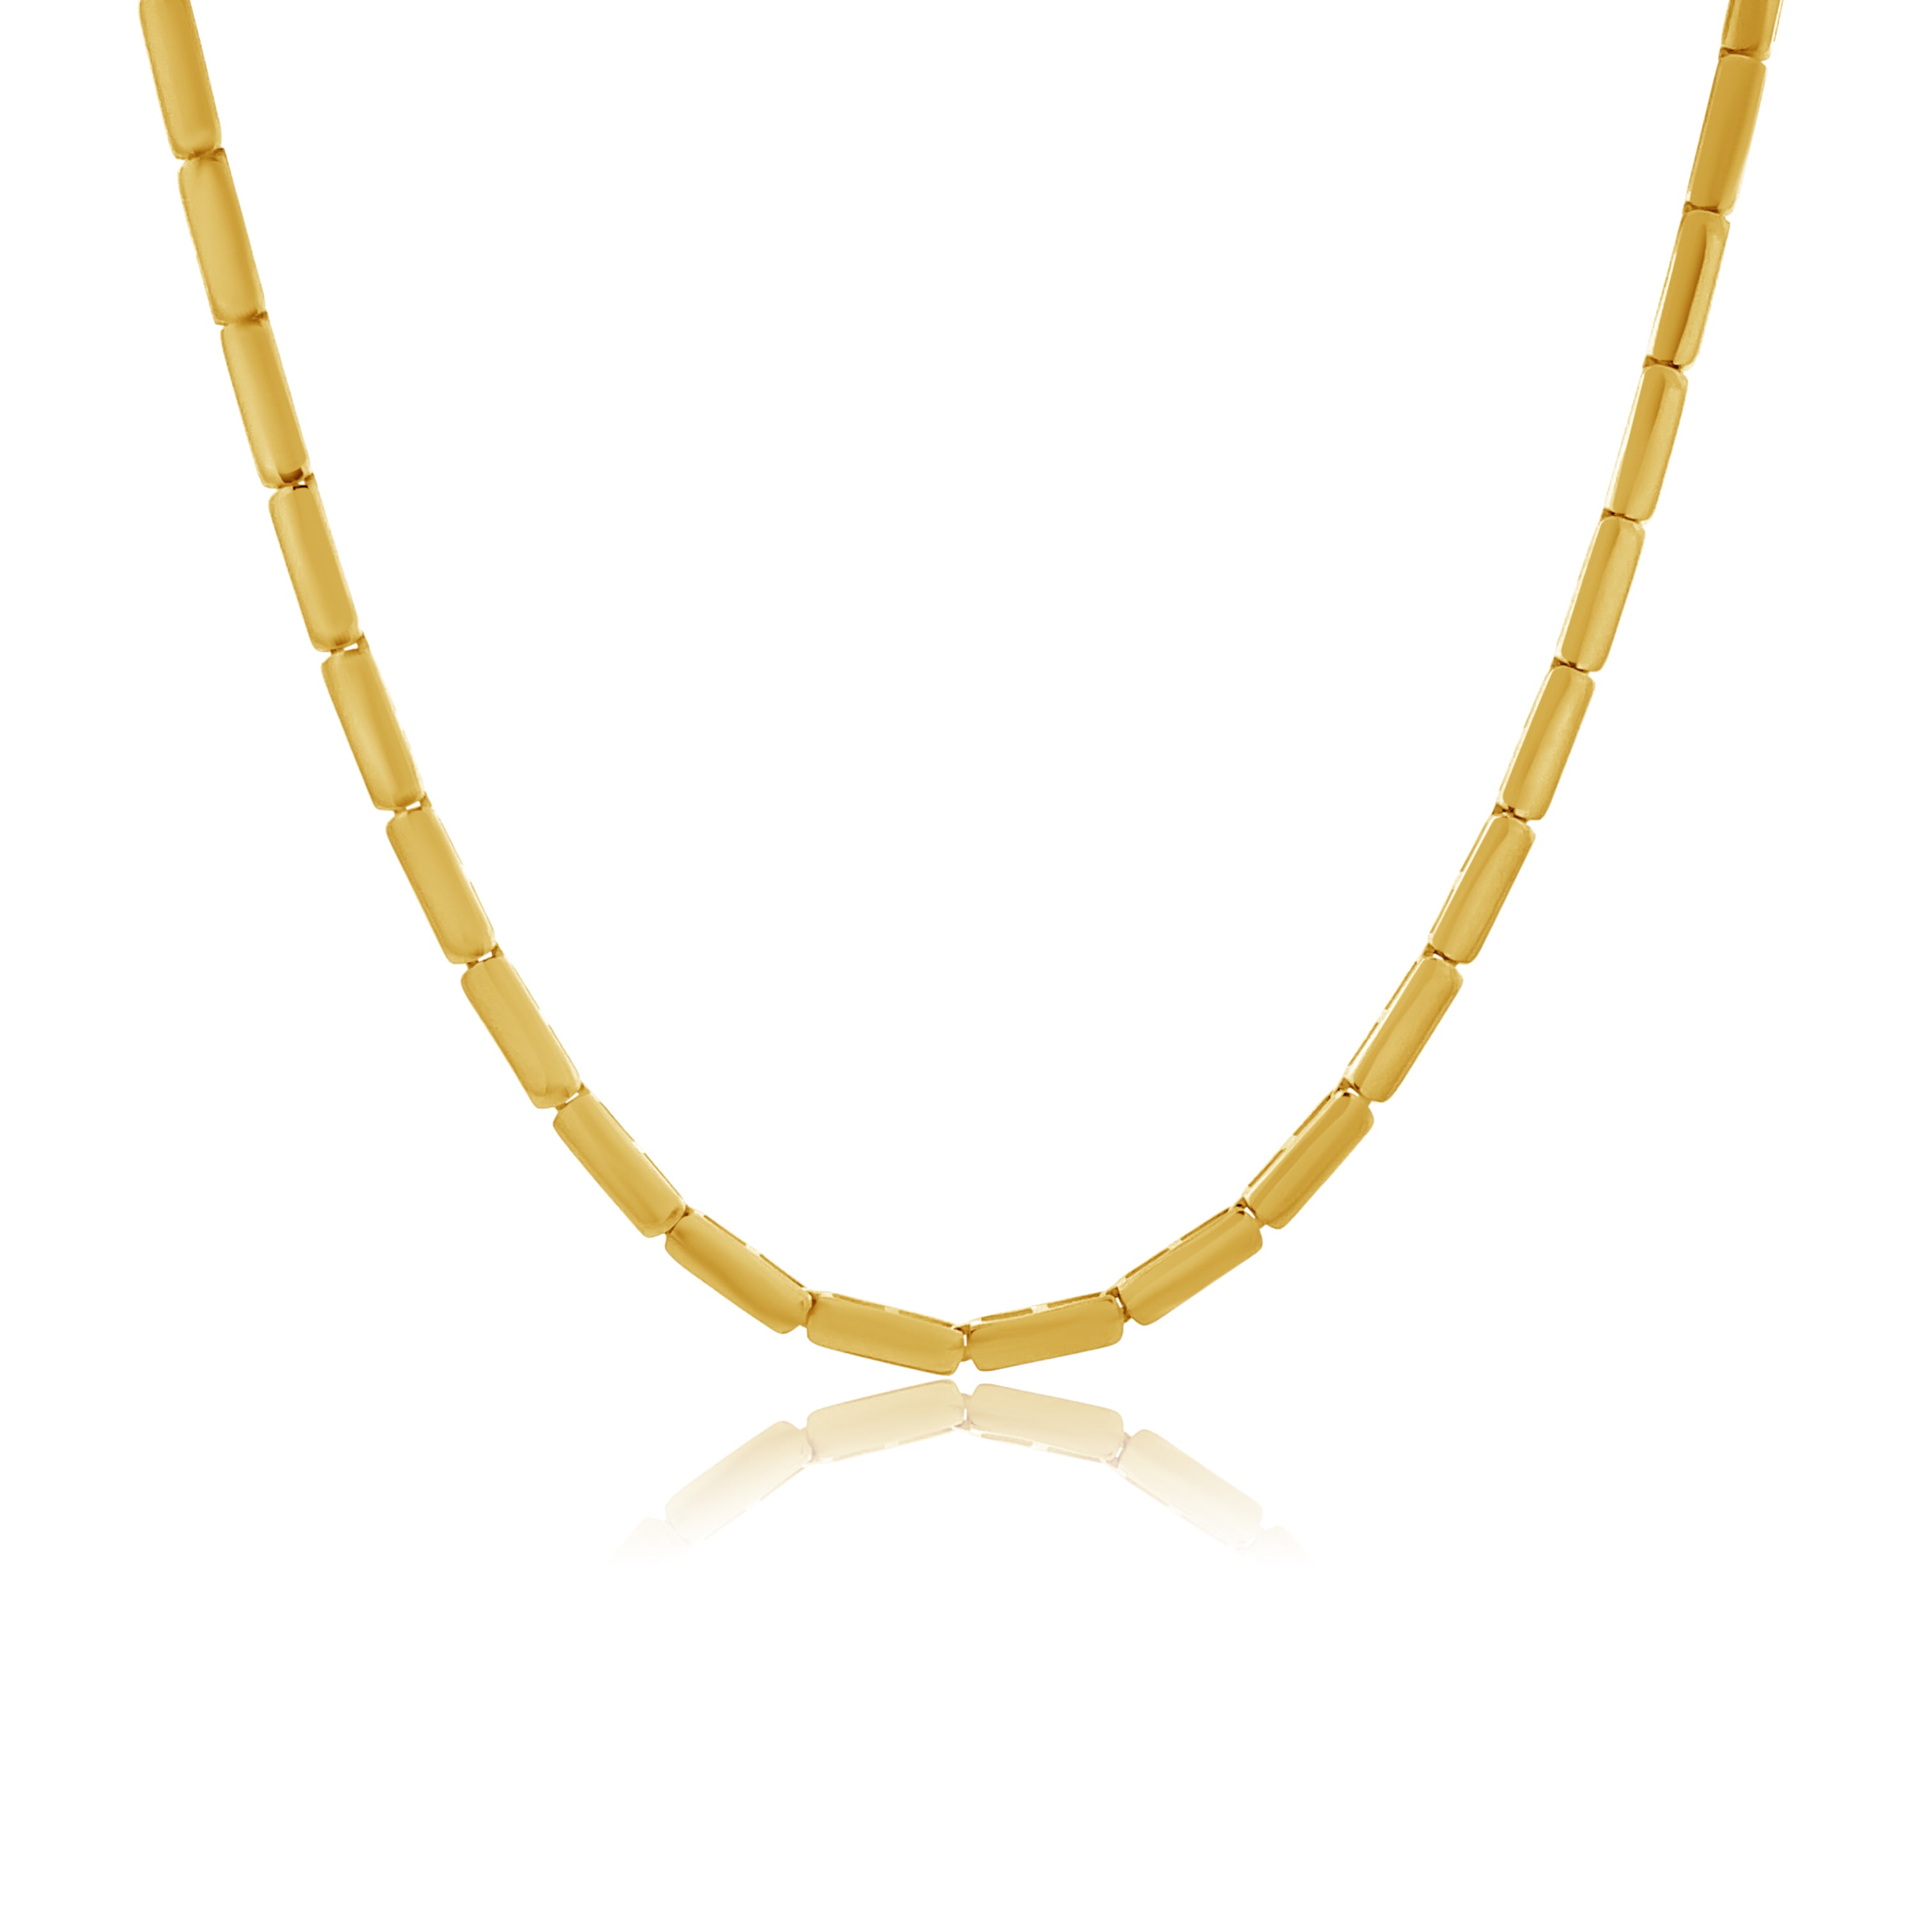 Movable Gold Bar Choker Necklace